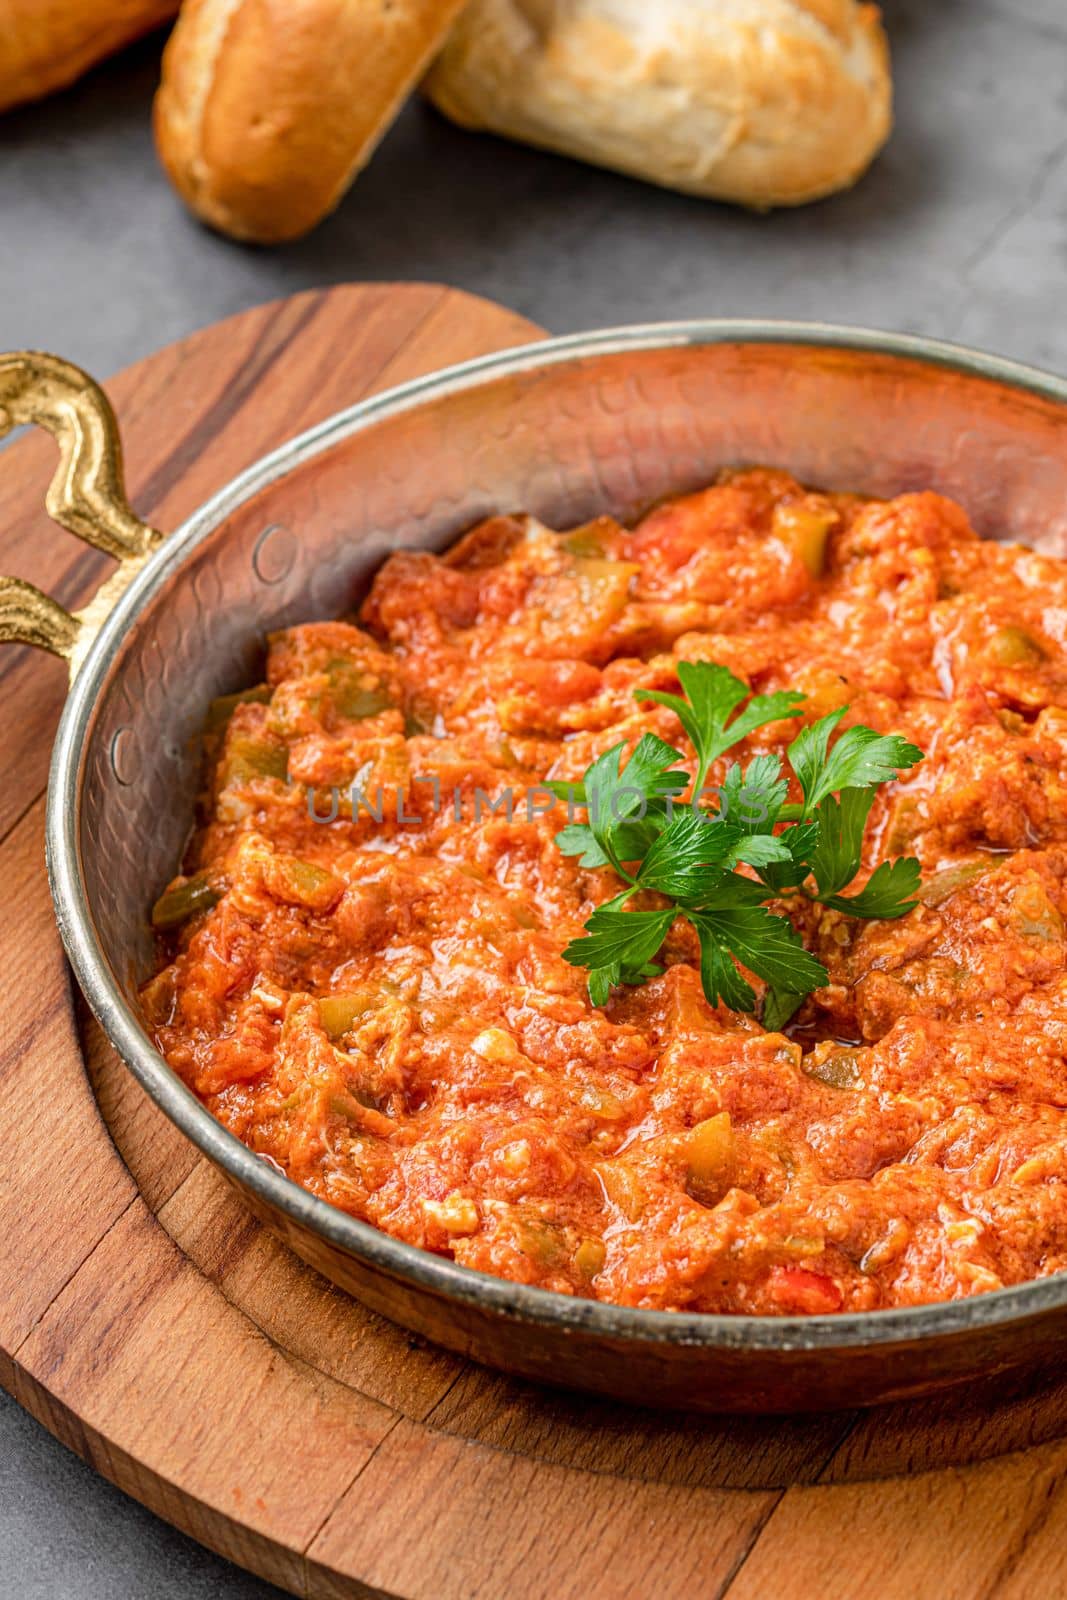 Turkish traditional menemen dish made with eggs, onions, peppers and tomatoes by Sonat